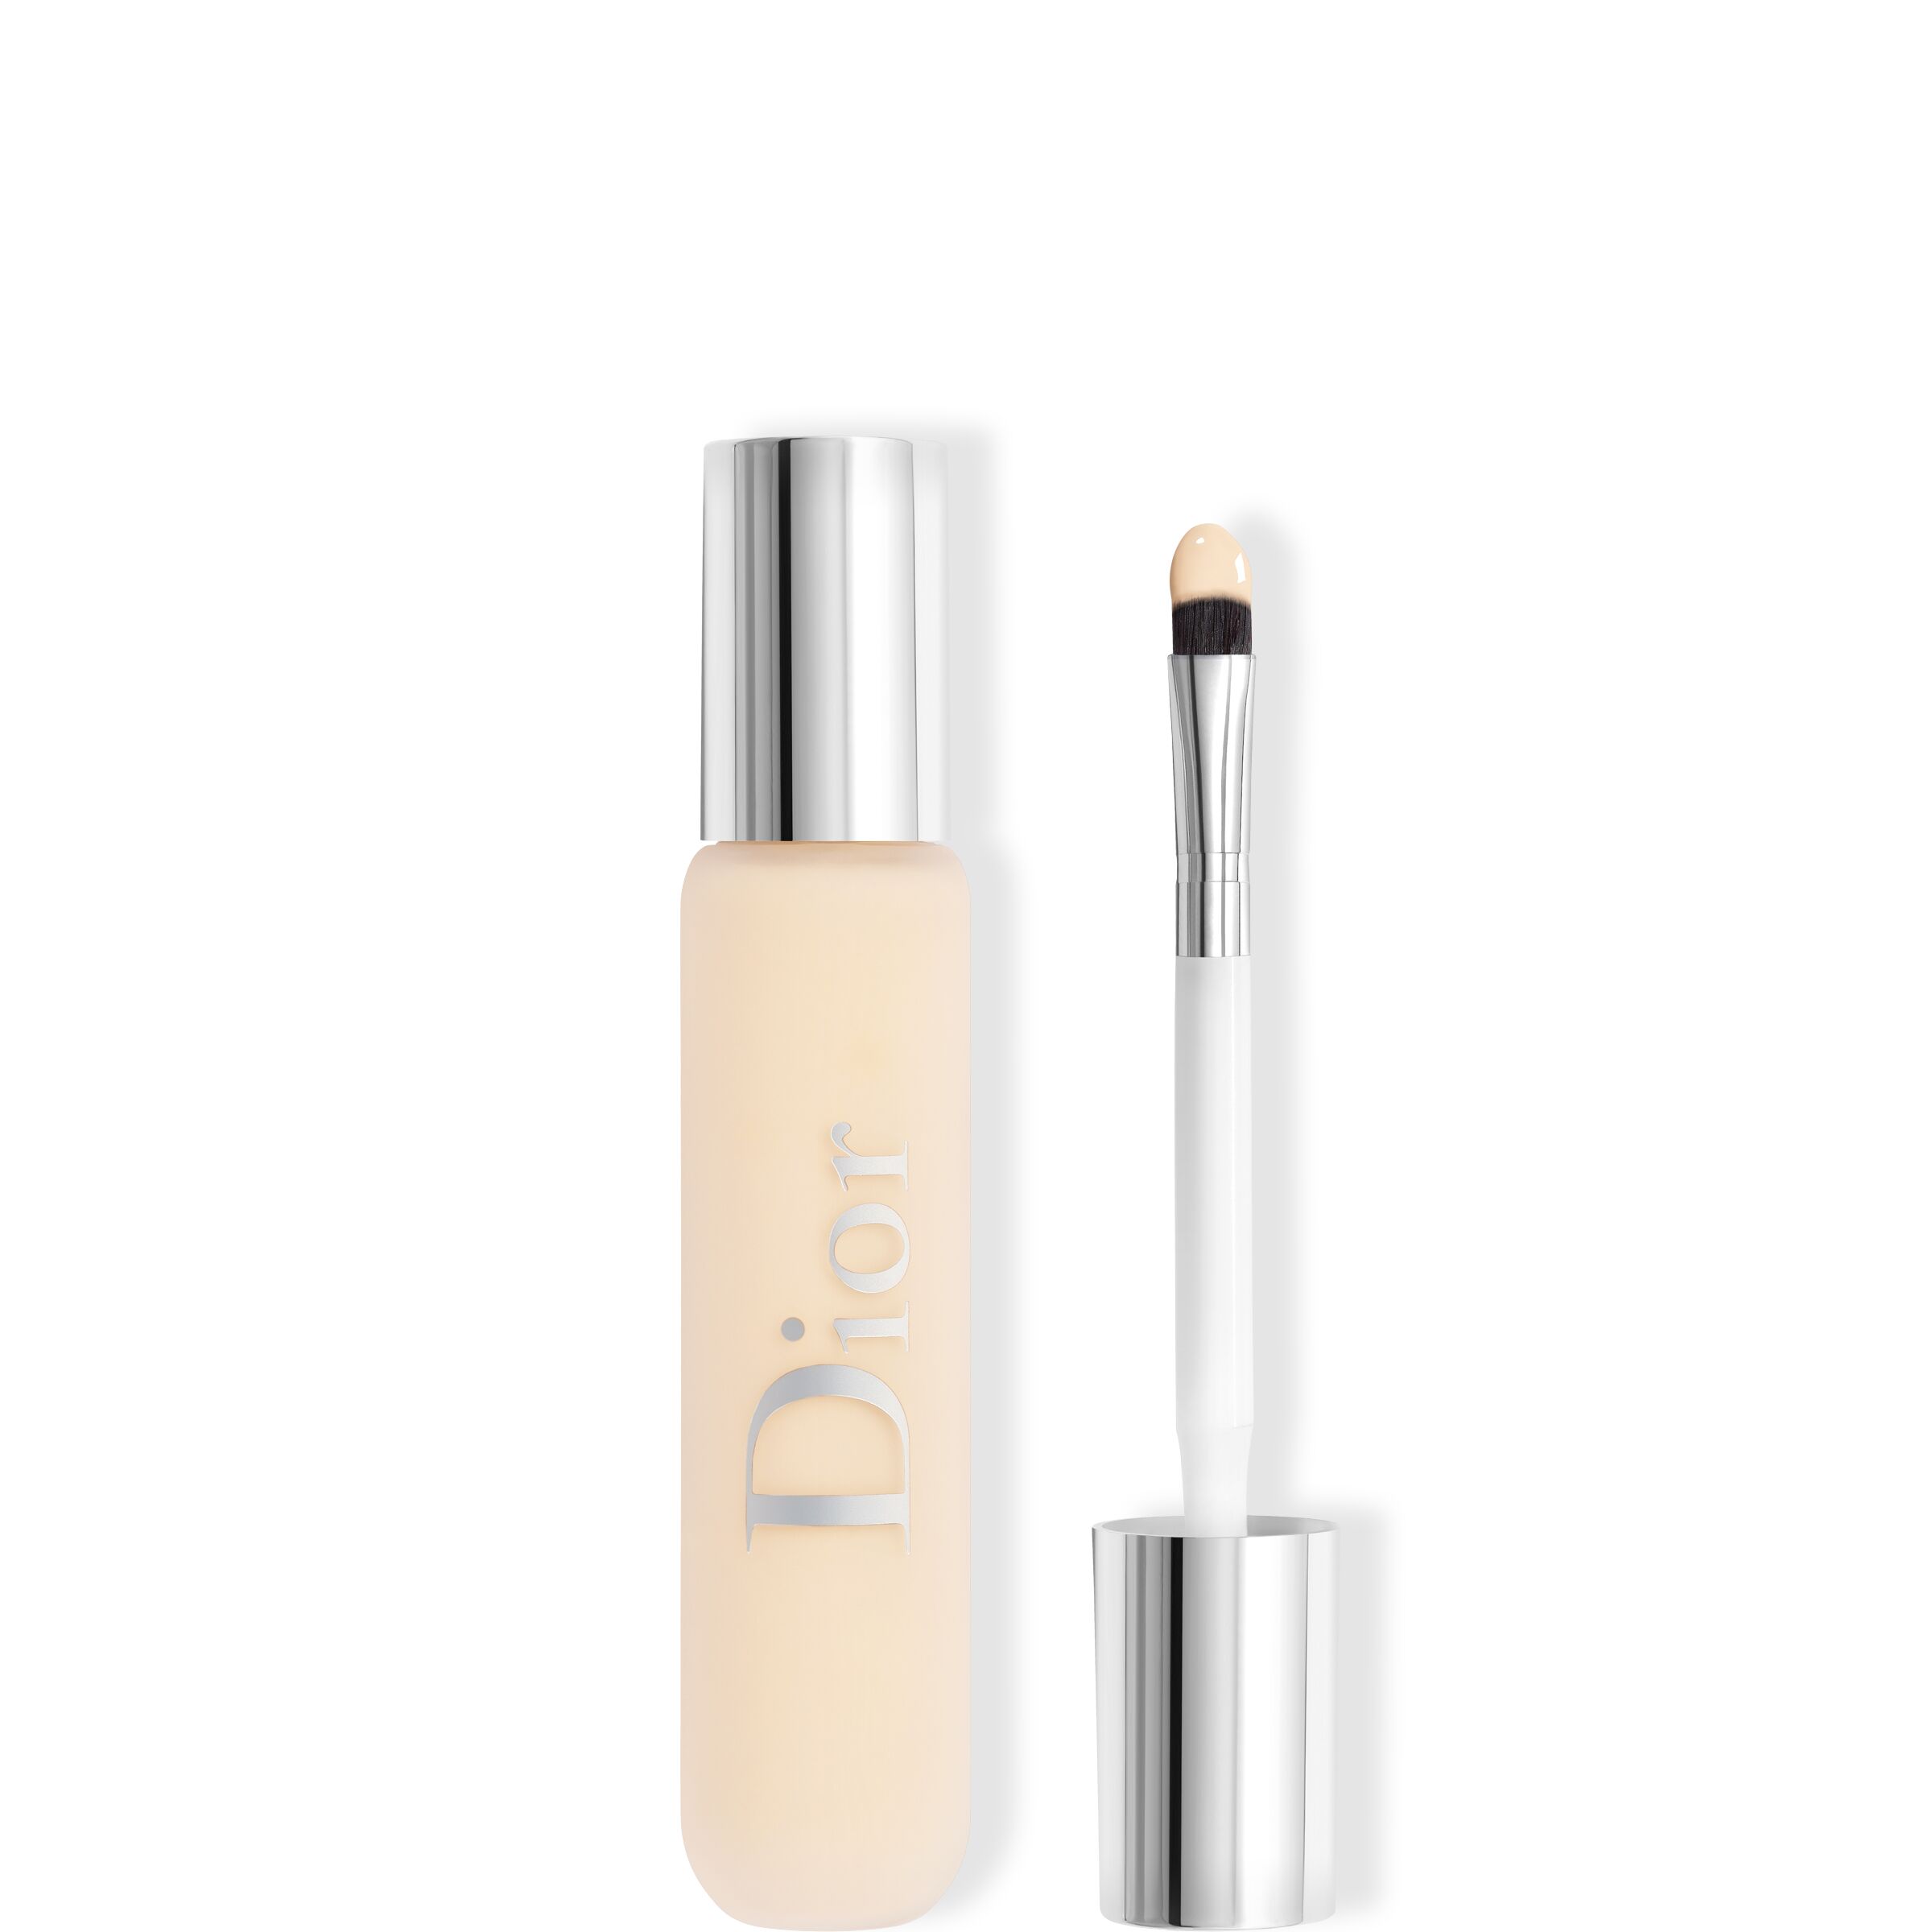  Backstage Face & Body Flash Perfector Concealer